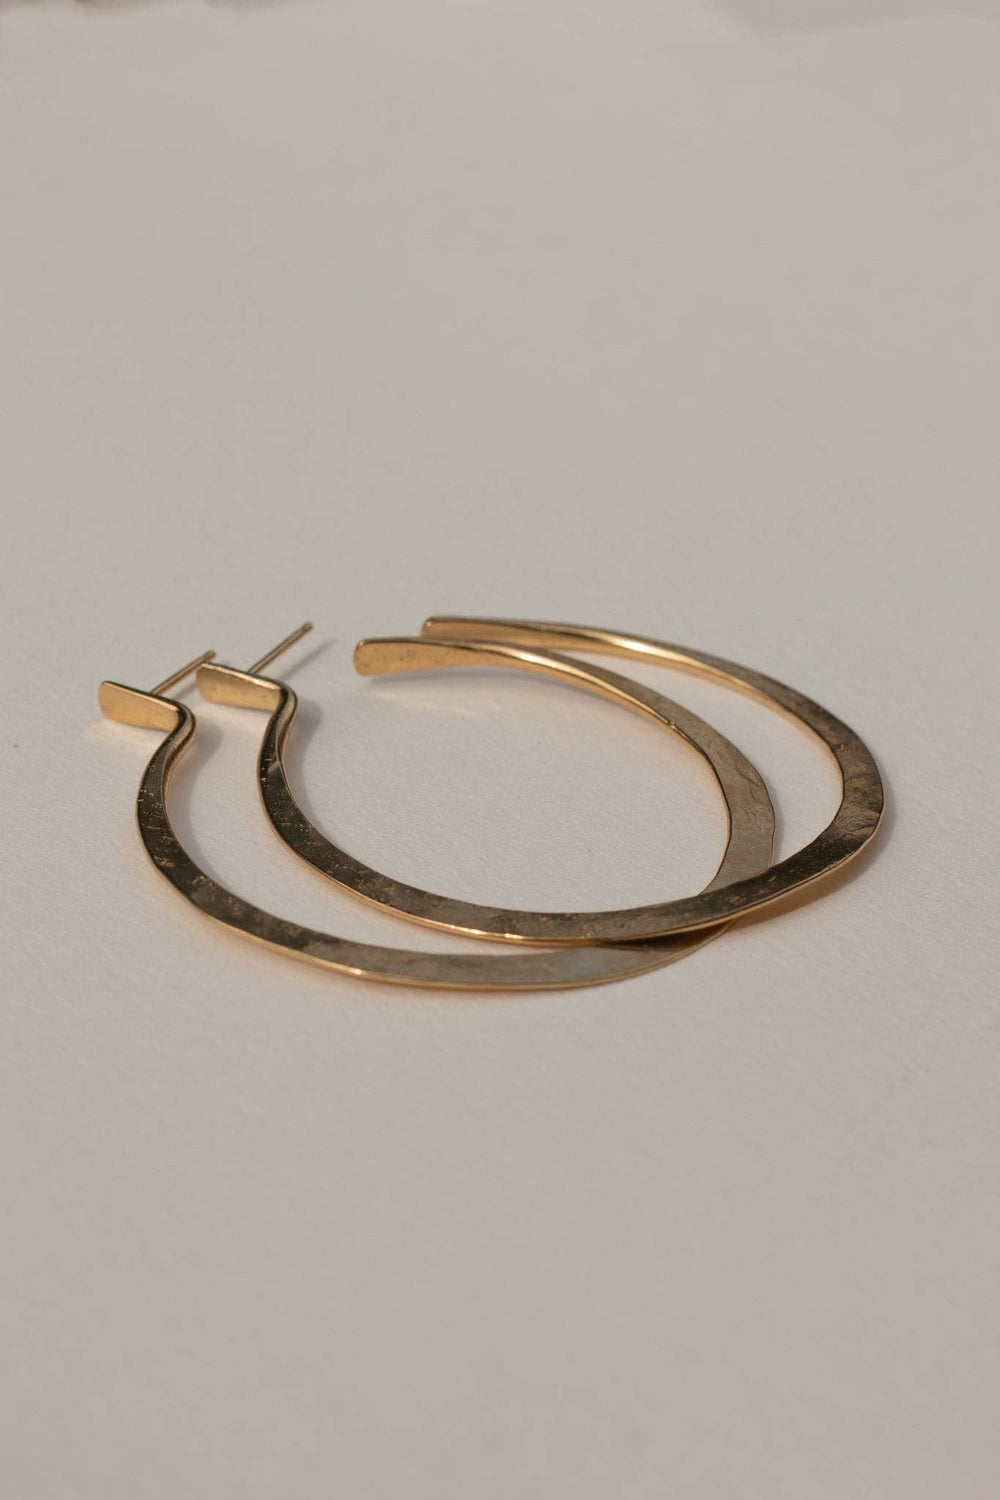 made in malawi These statement hoops feature a unique, textured design, yet are light enough for everyday wear. Make a bold statement without weighing you down with the Lenga Hoops.